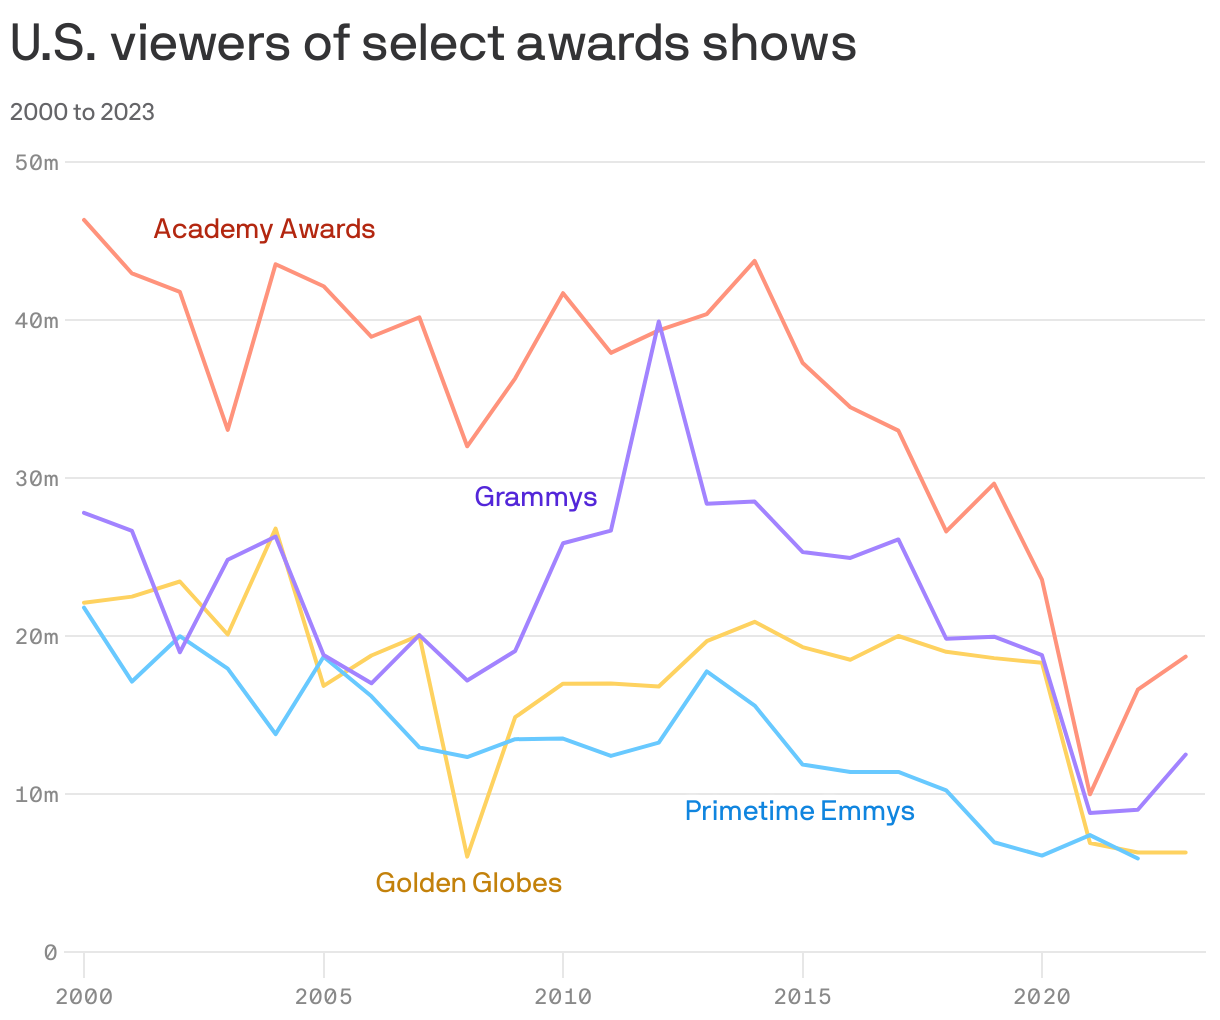 U.S. viewers of select awards shows